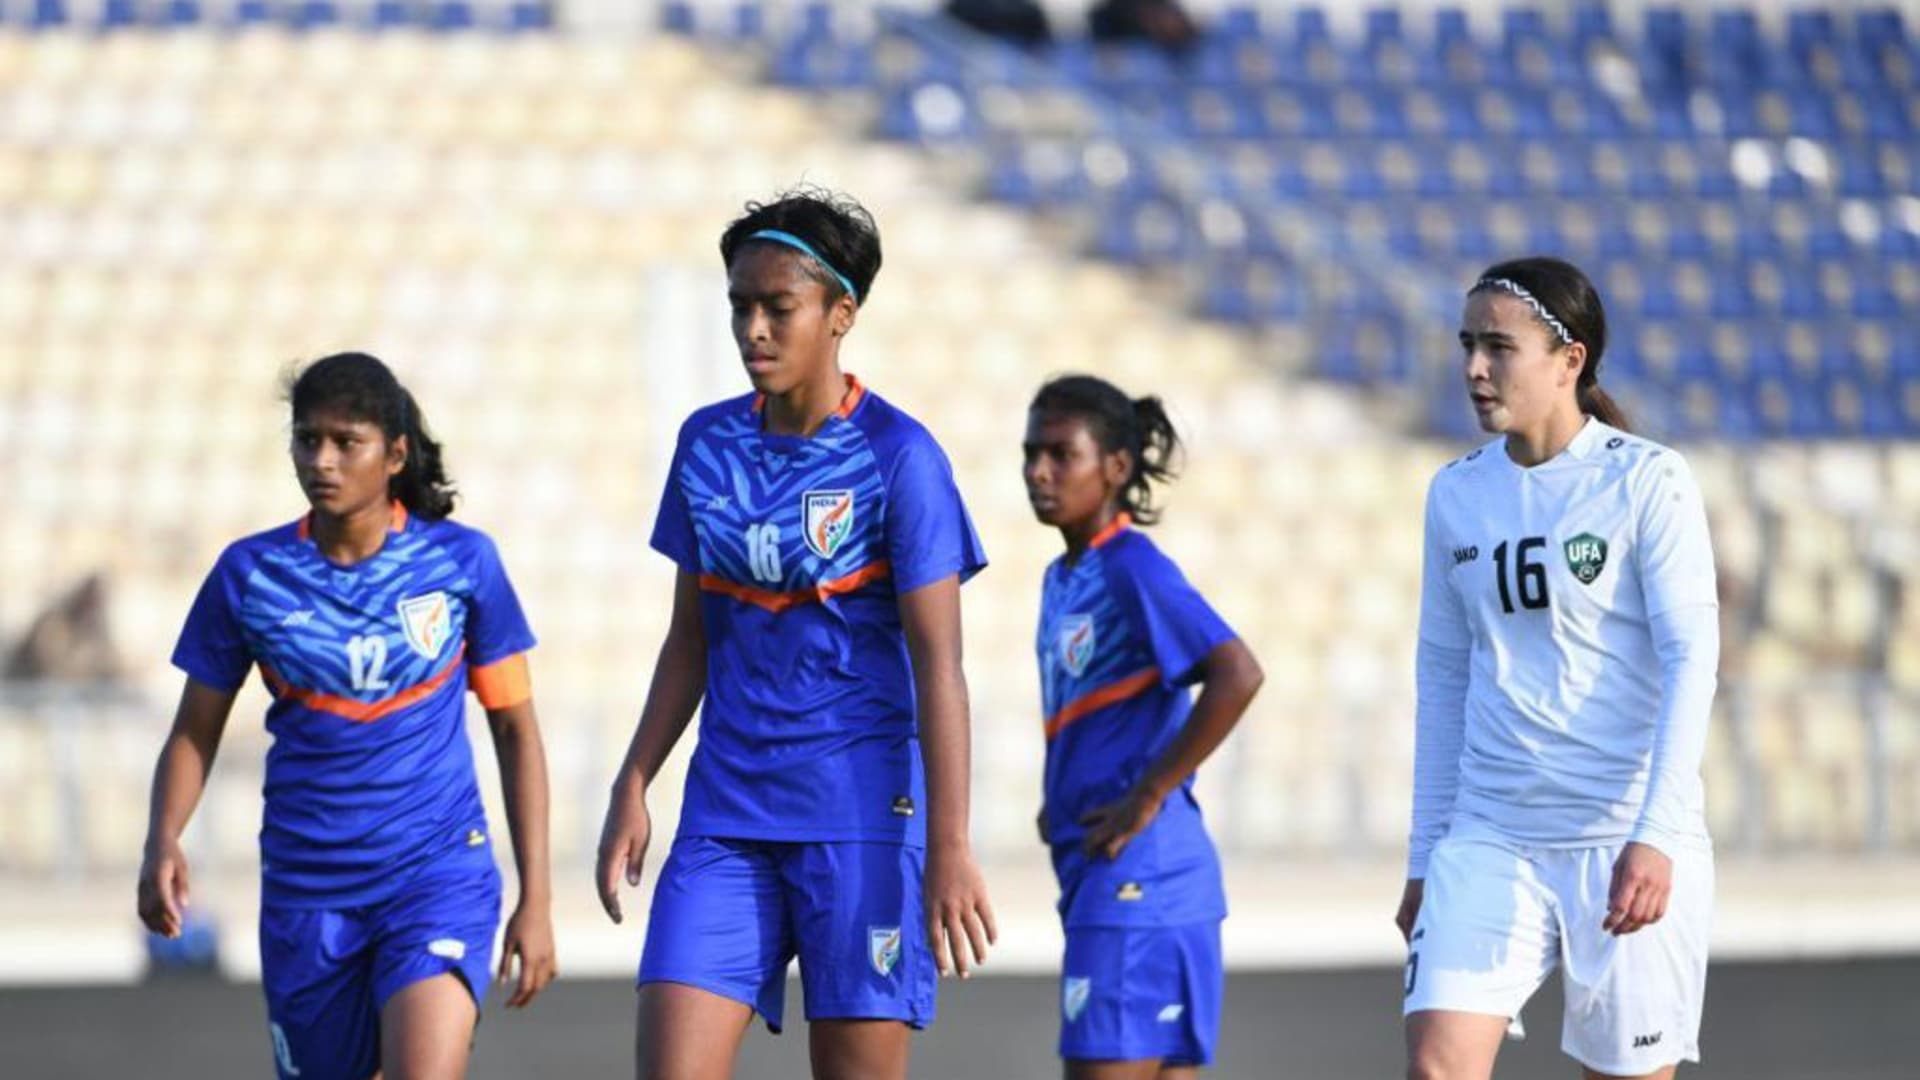 Indian women's football team vs Belarus international friendly: Watch live streaming in India, get match times